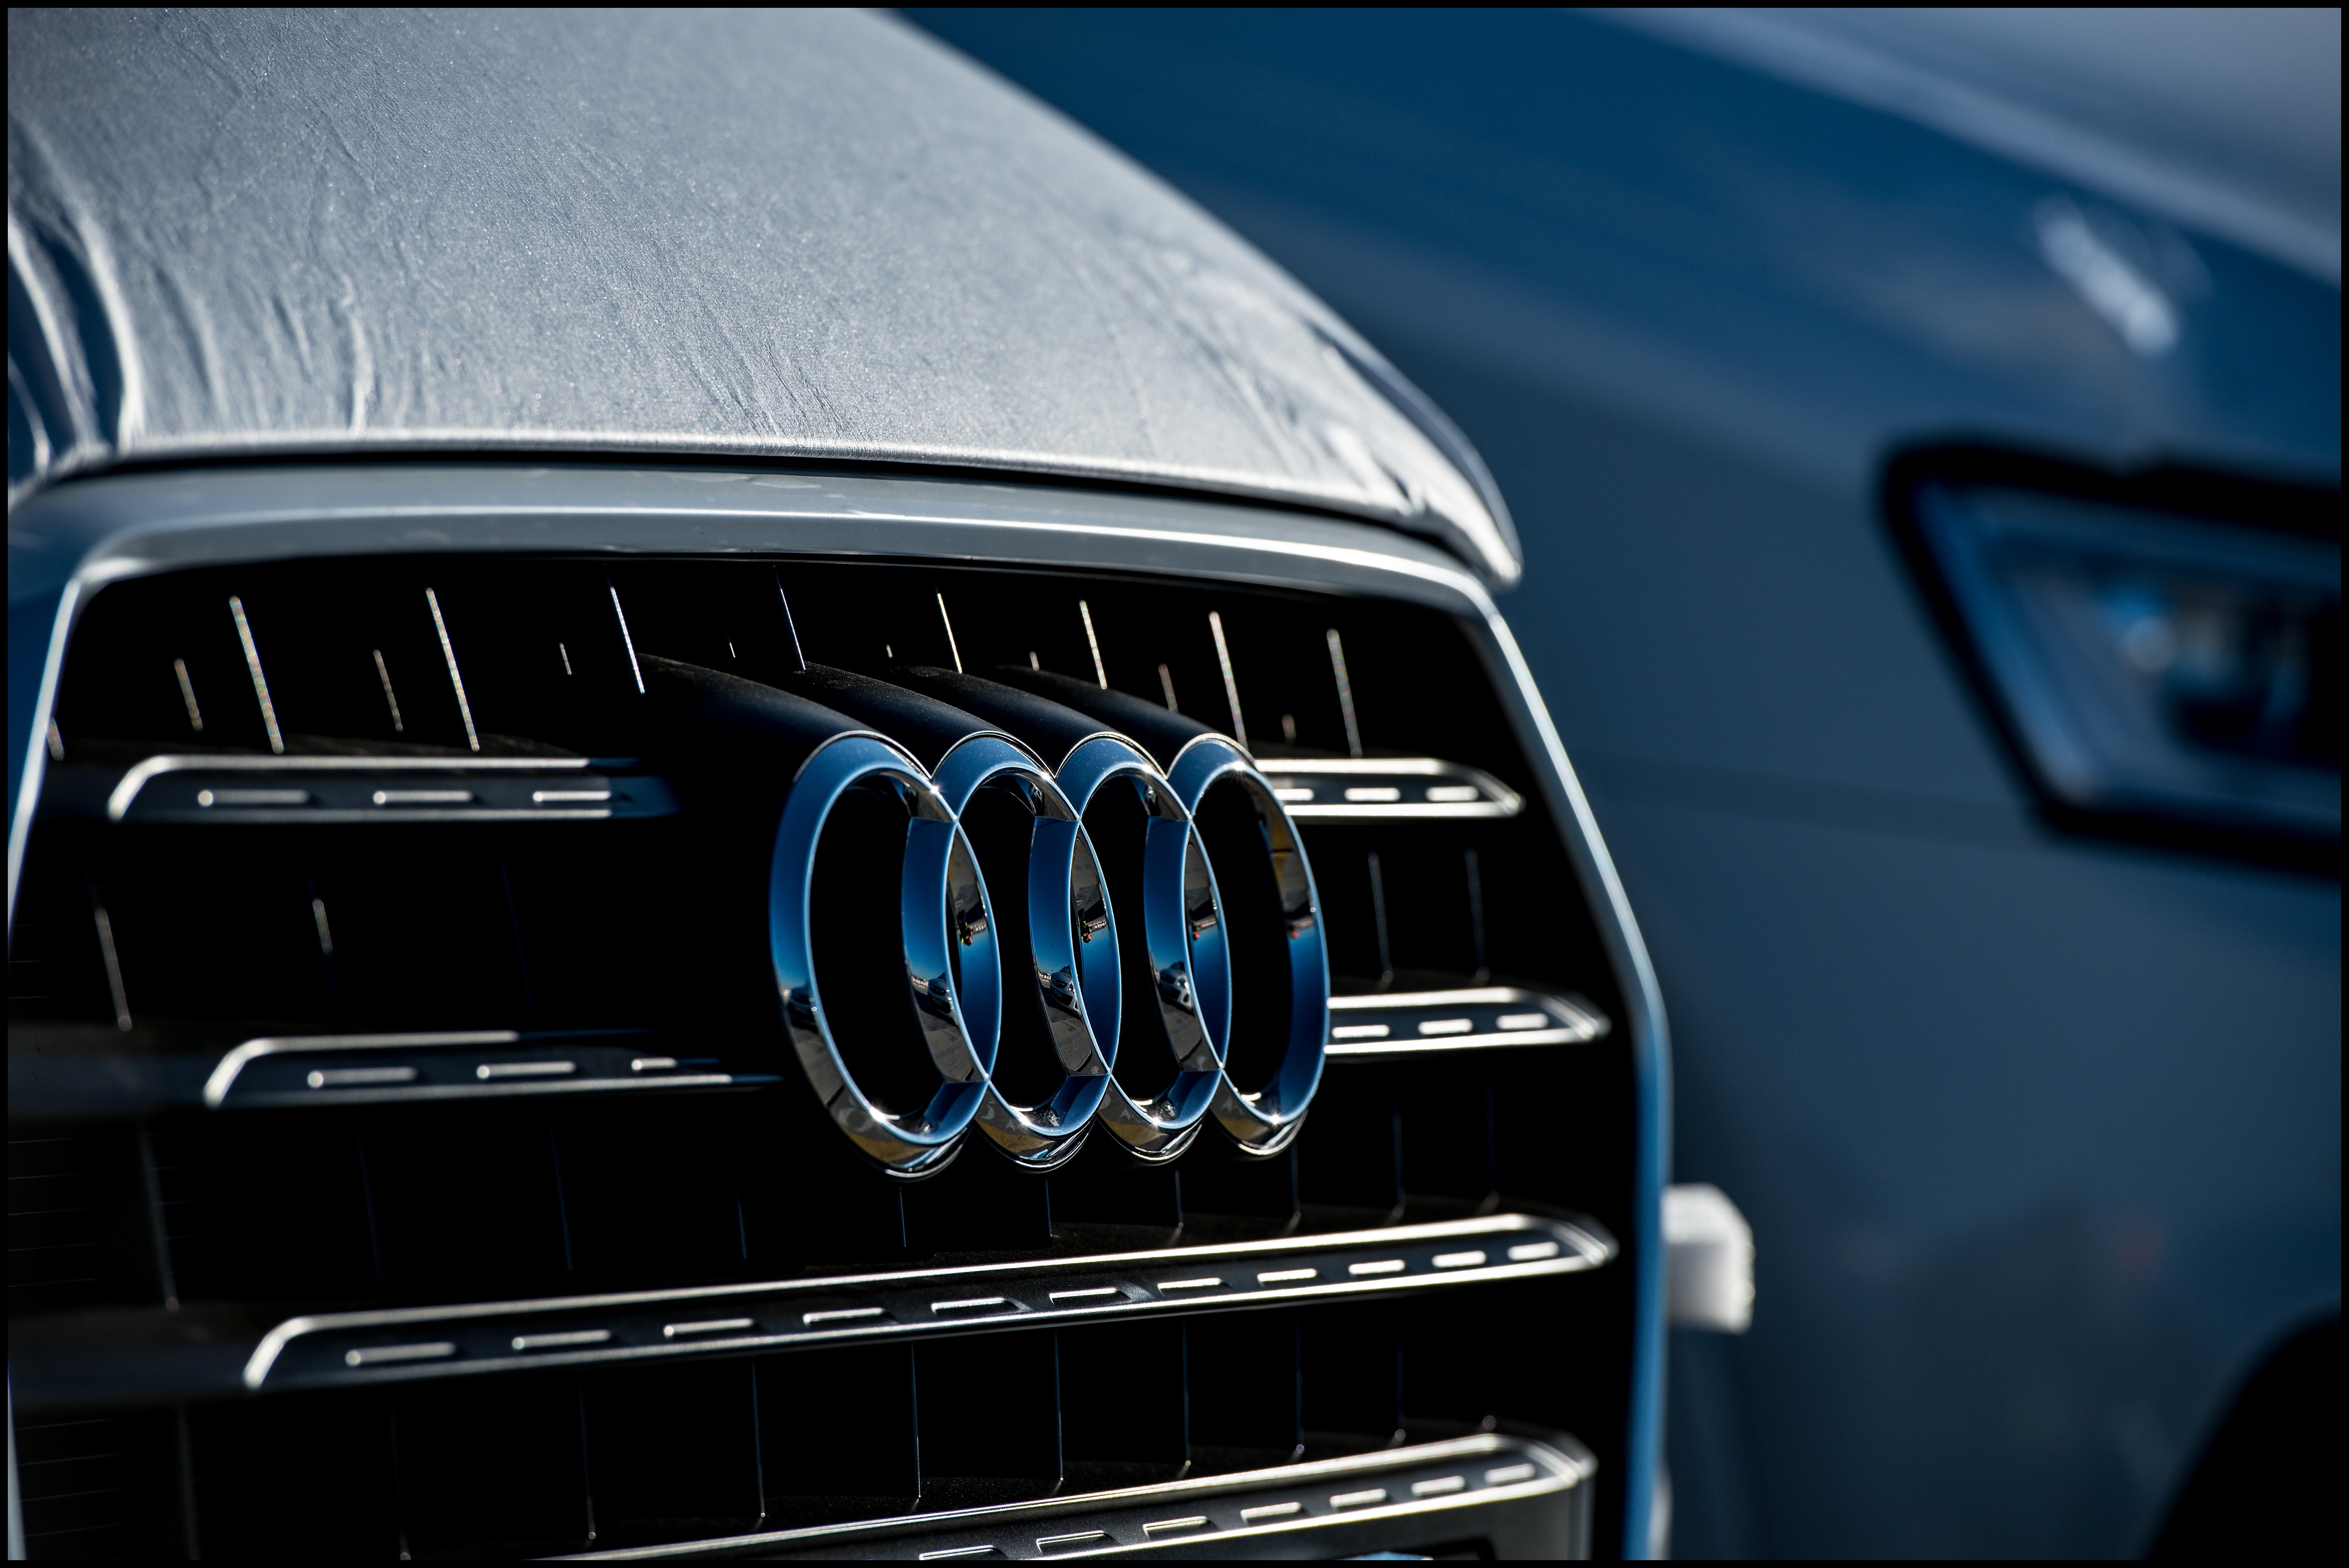 A close up view of the Audi emblem is seen on a new Audi vehicle